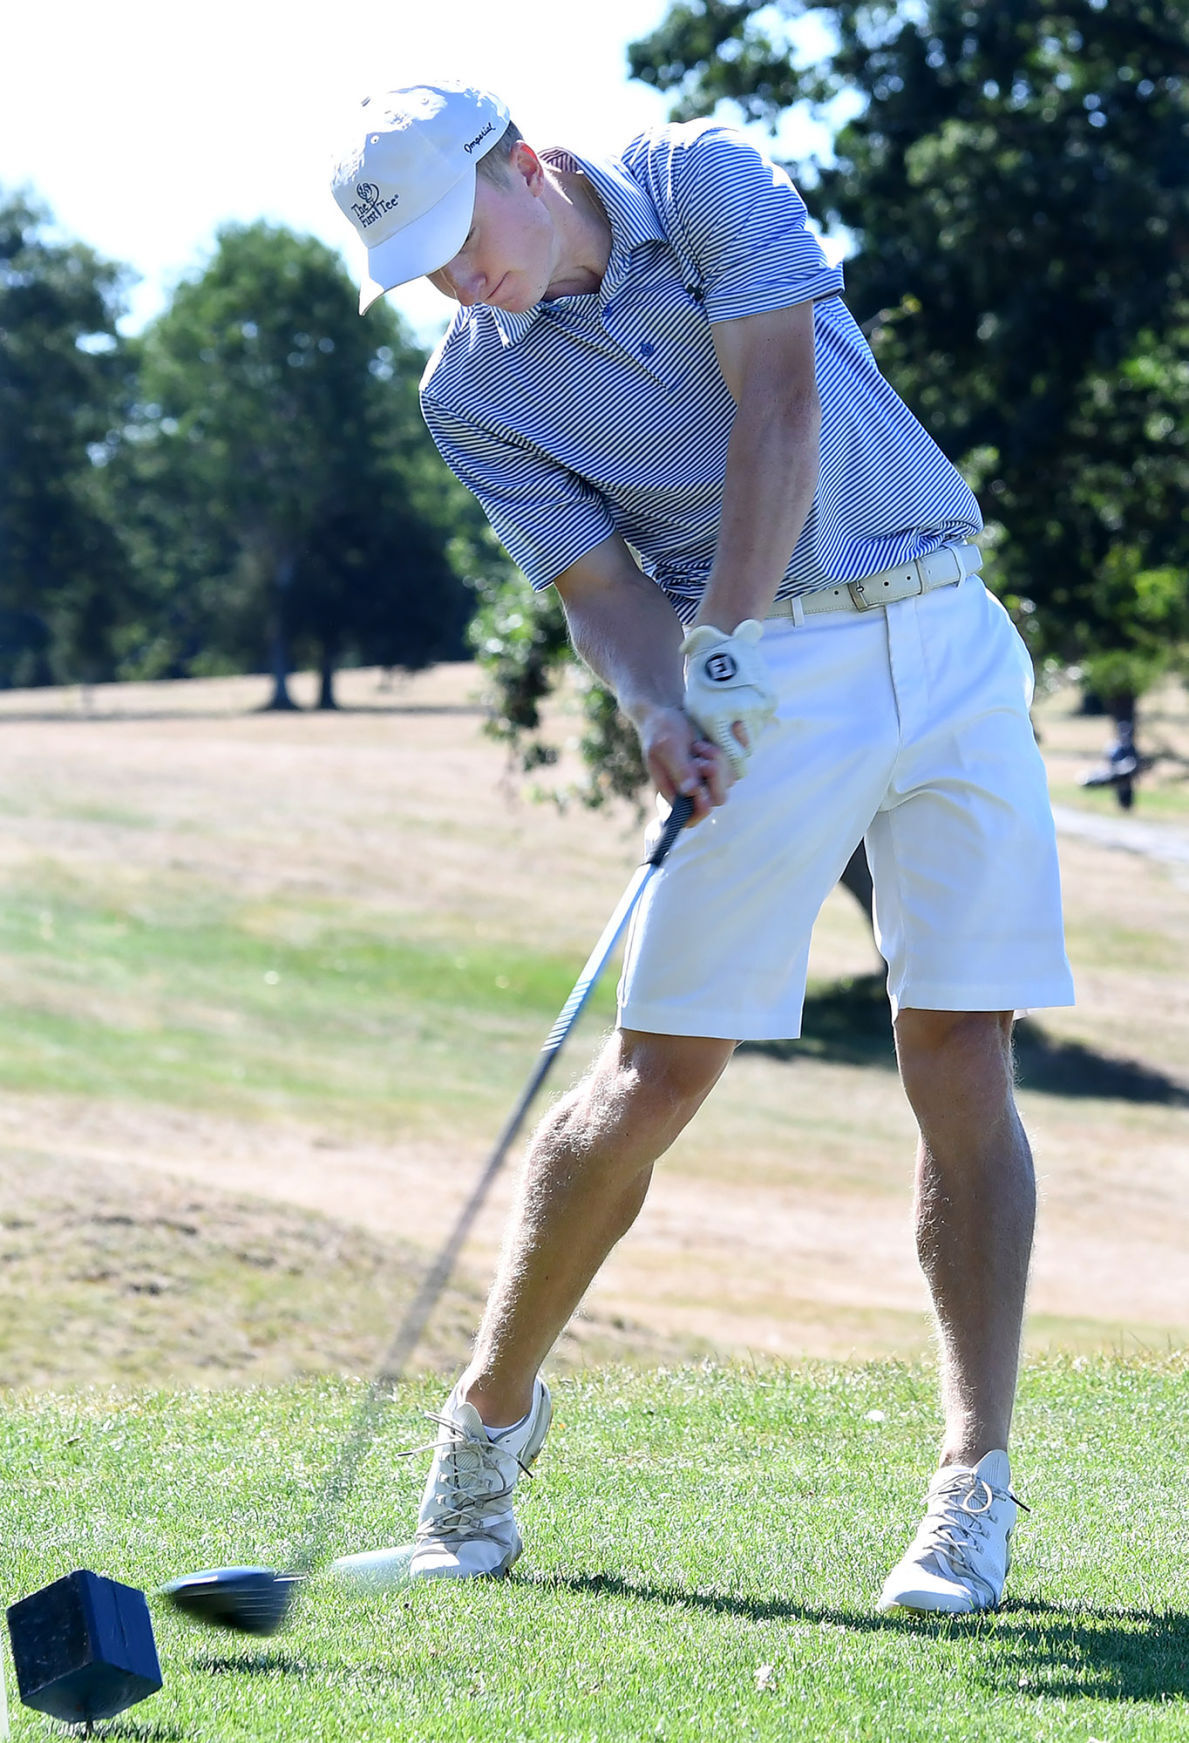 Turgeon a straight shooter for 3-shot lead at AAGA City Open | Golf ...